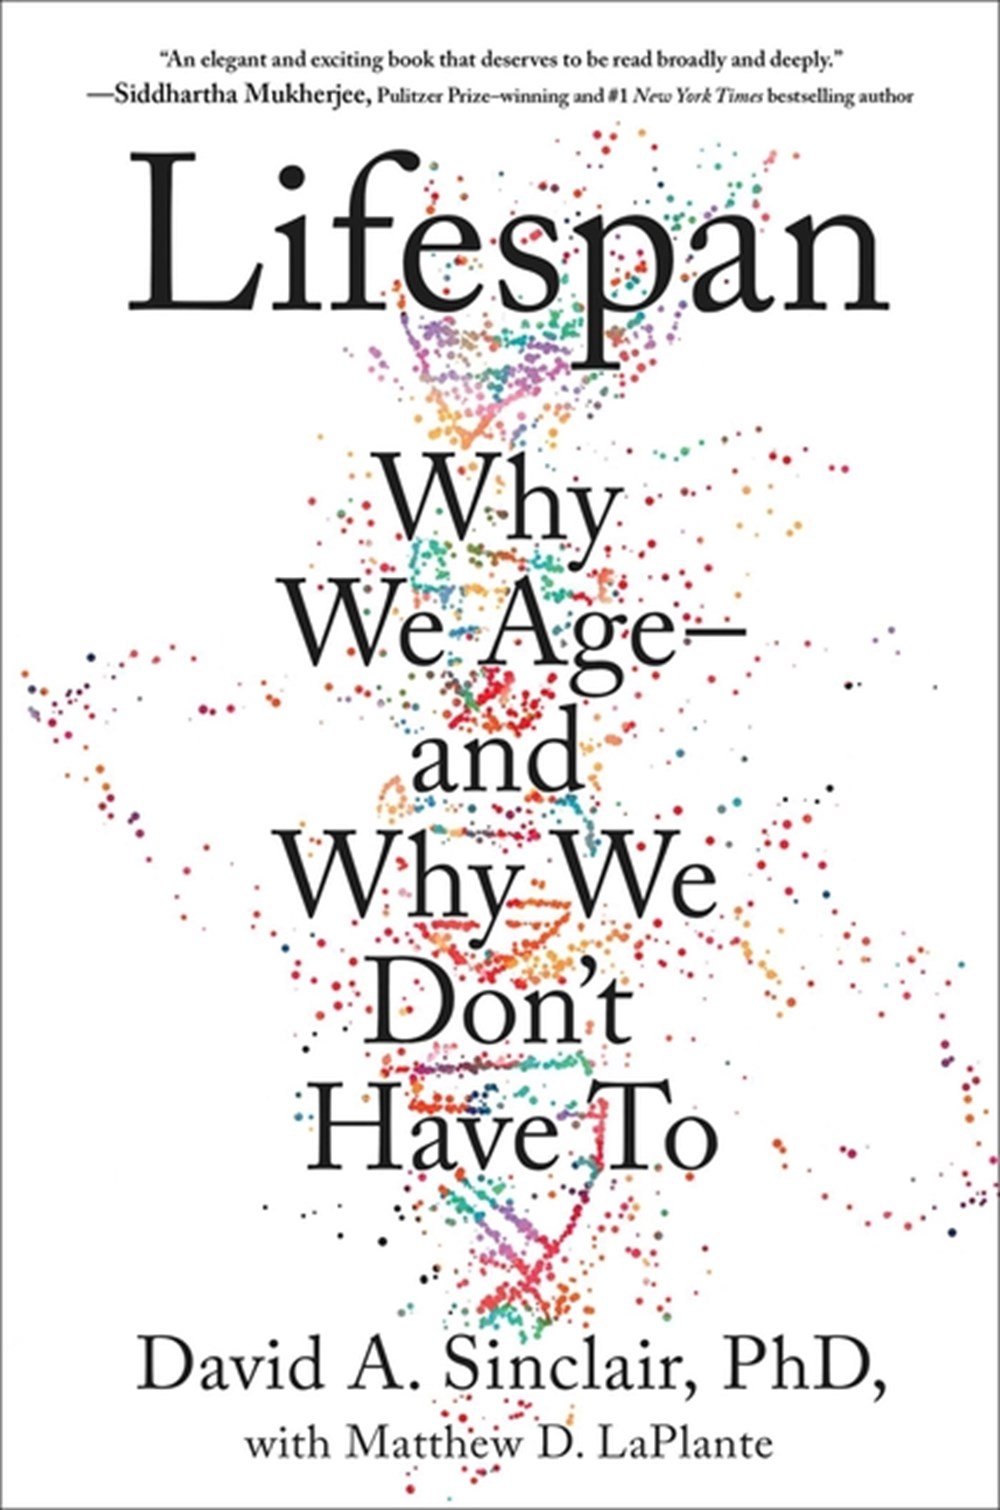 Lifespan Why We Age--And Why We Don't Have to